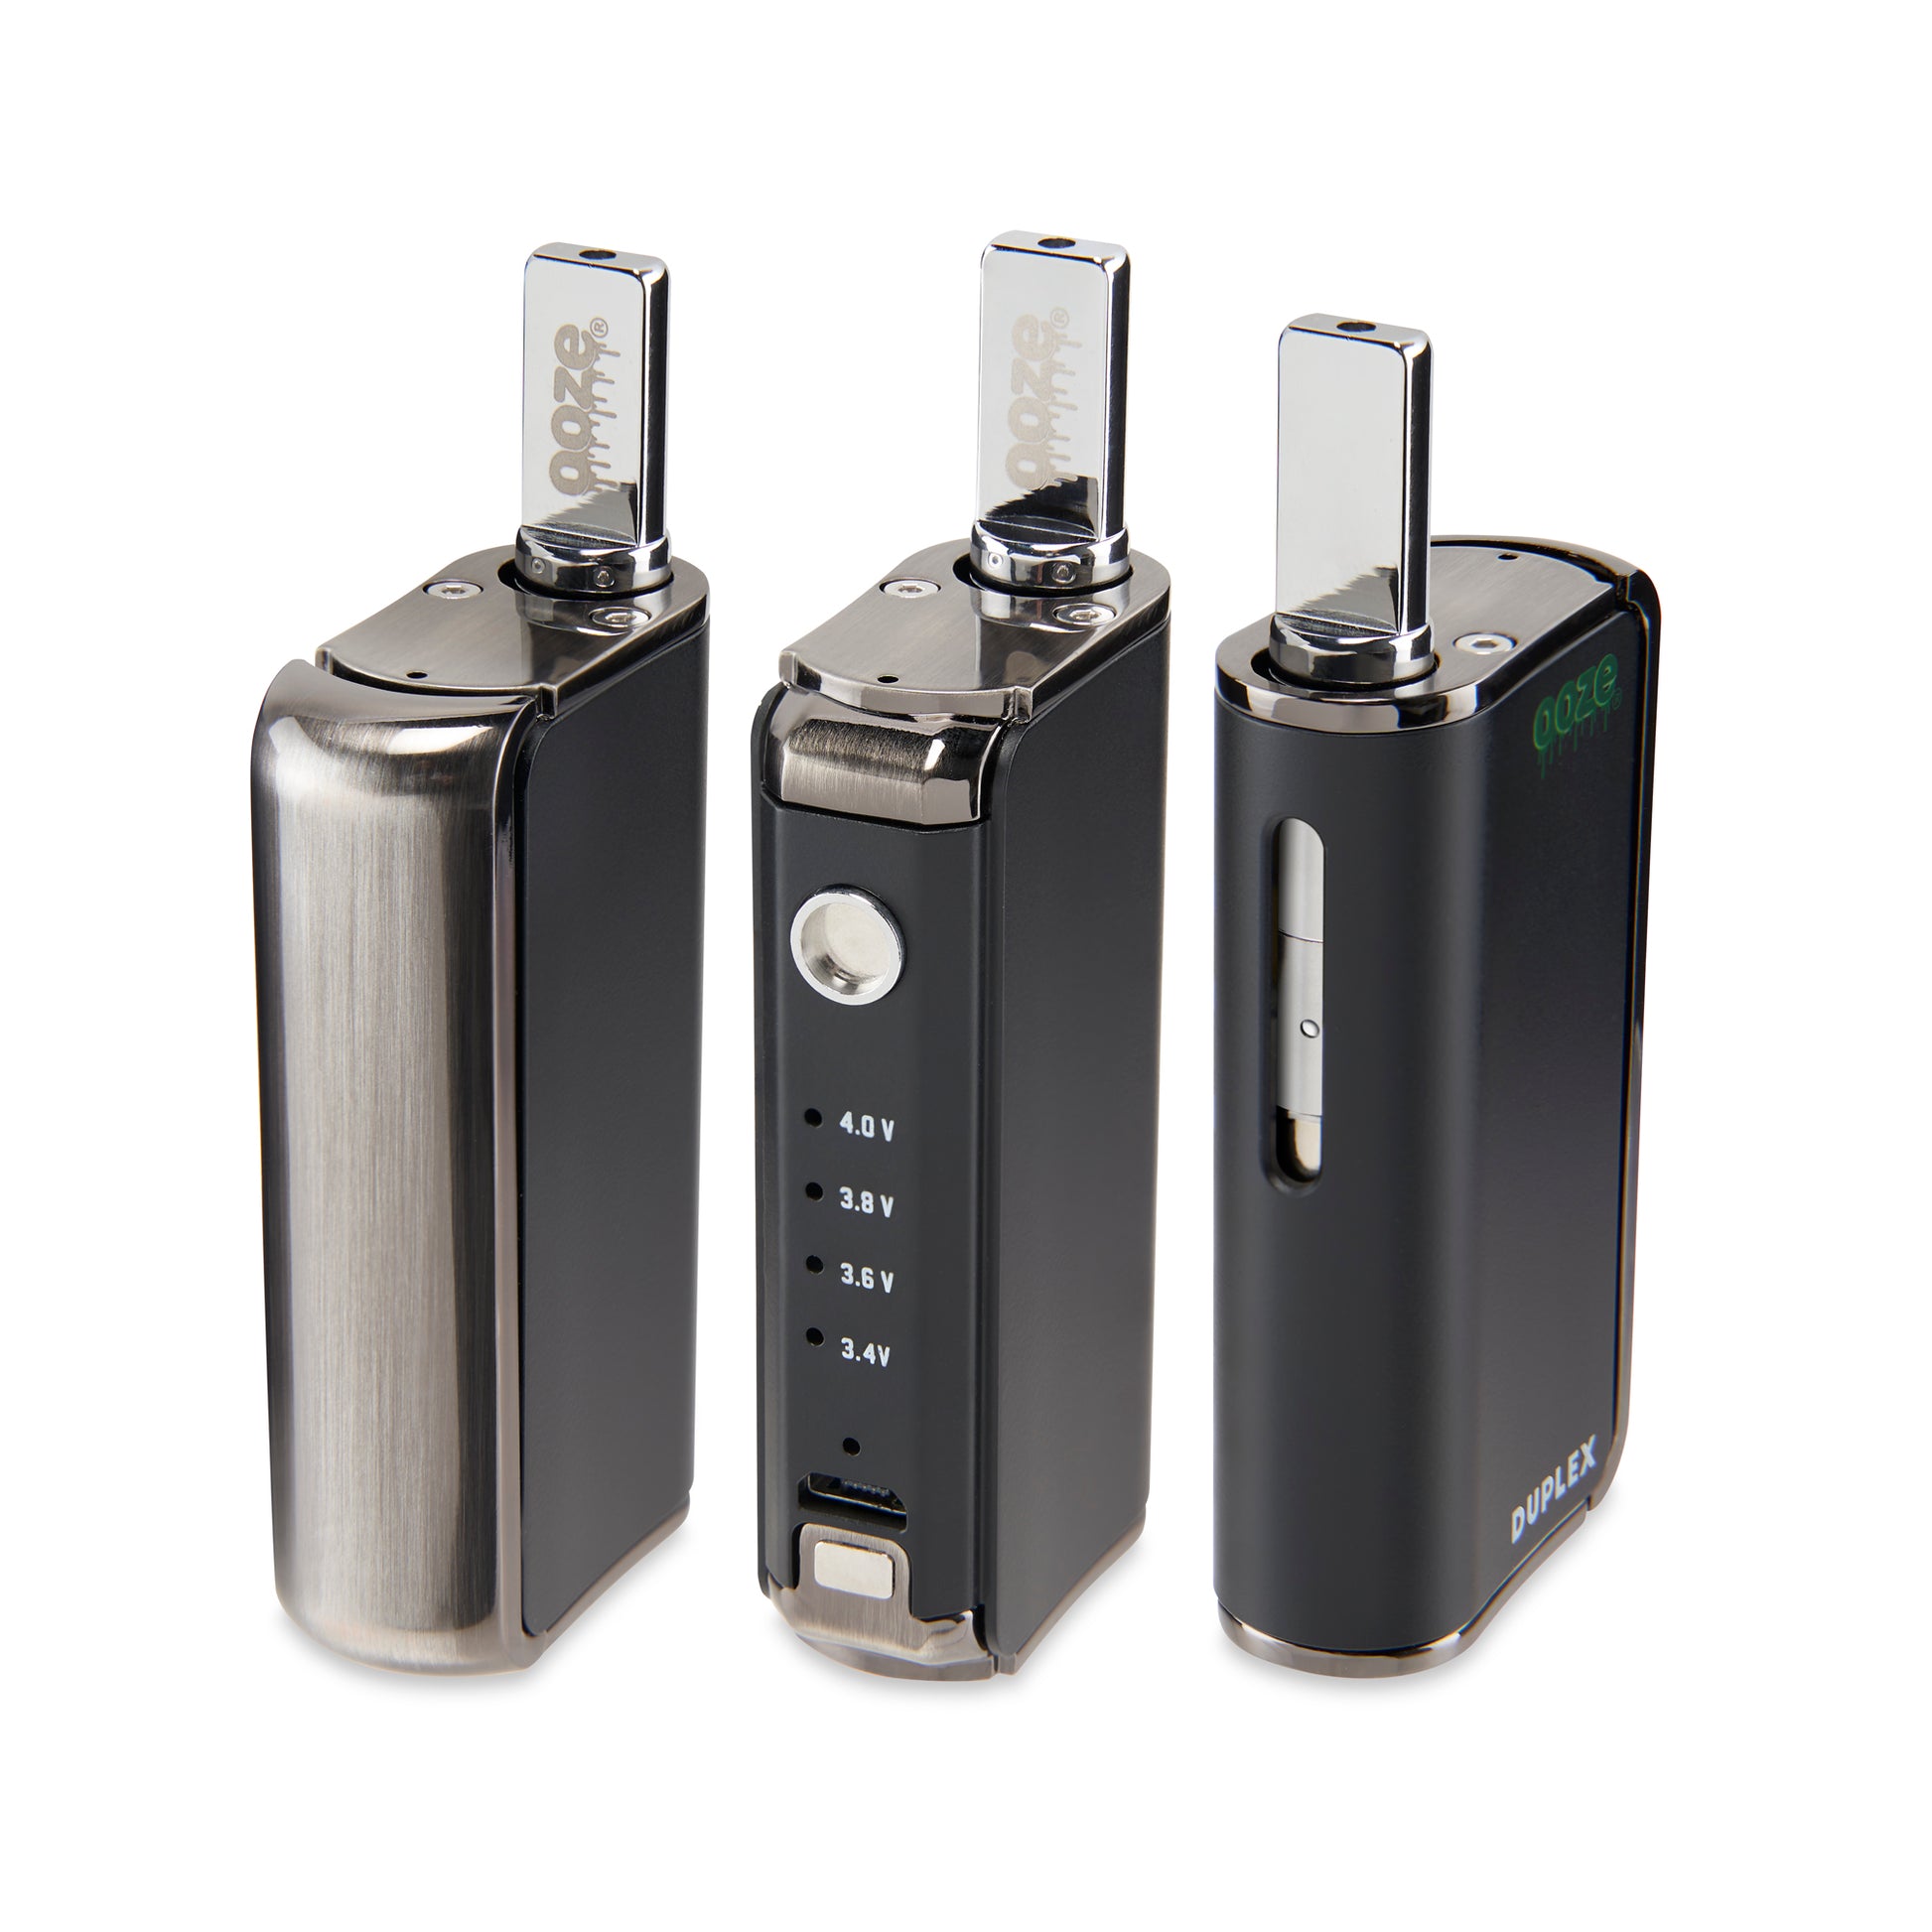 Three of The Panther Black Ooze Duplex Pro Vaporizers are shown in a row. The left shows the device with the magnetic trigger button attached, the middle shows it without, and the right shows the opposite end of the device.